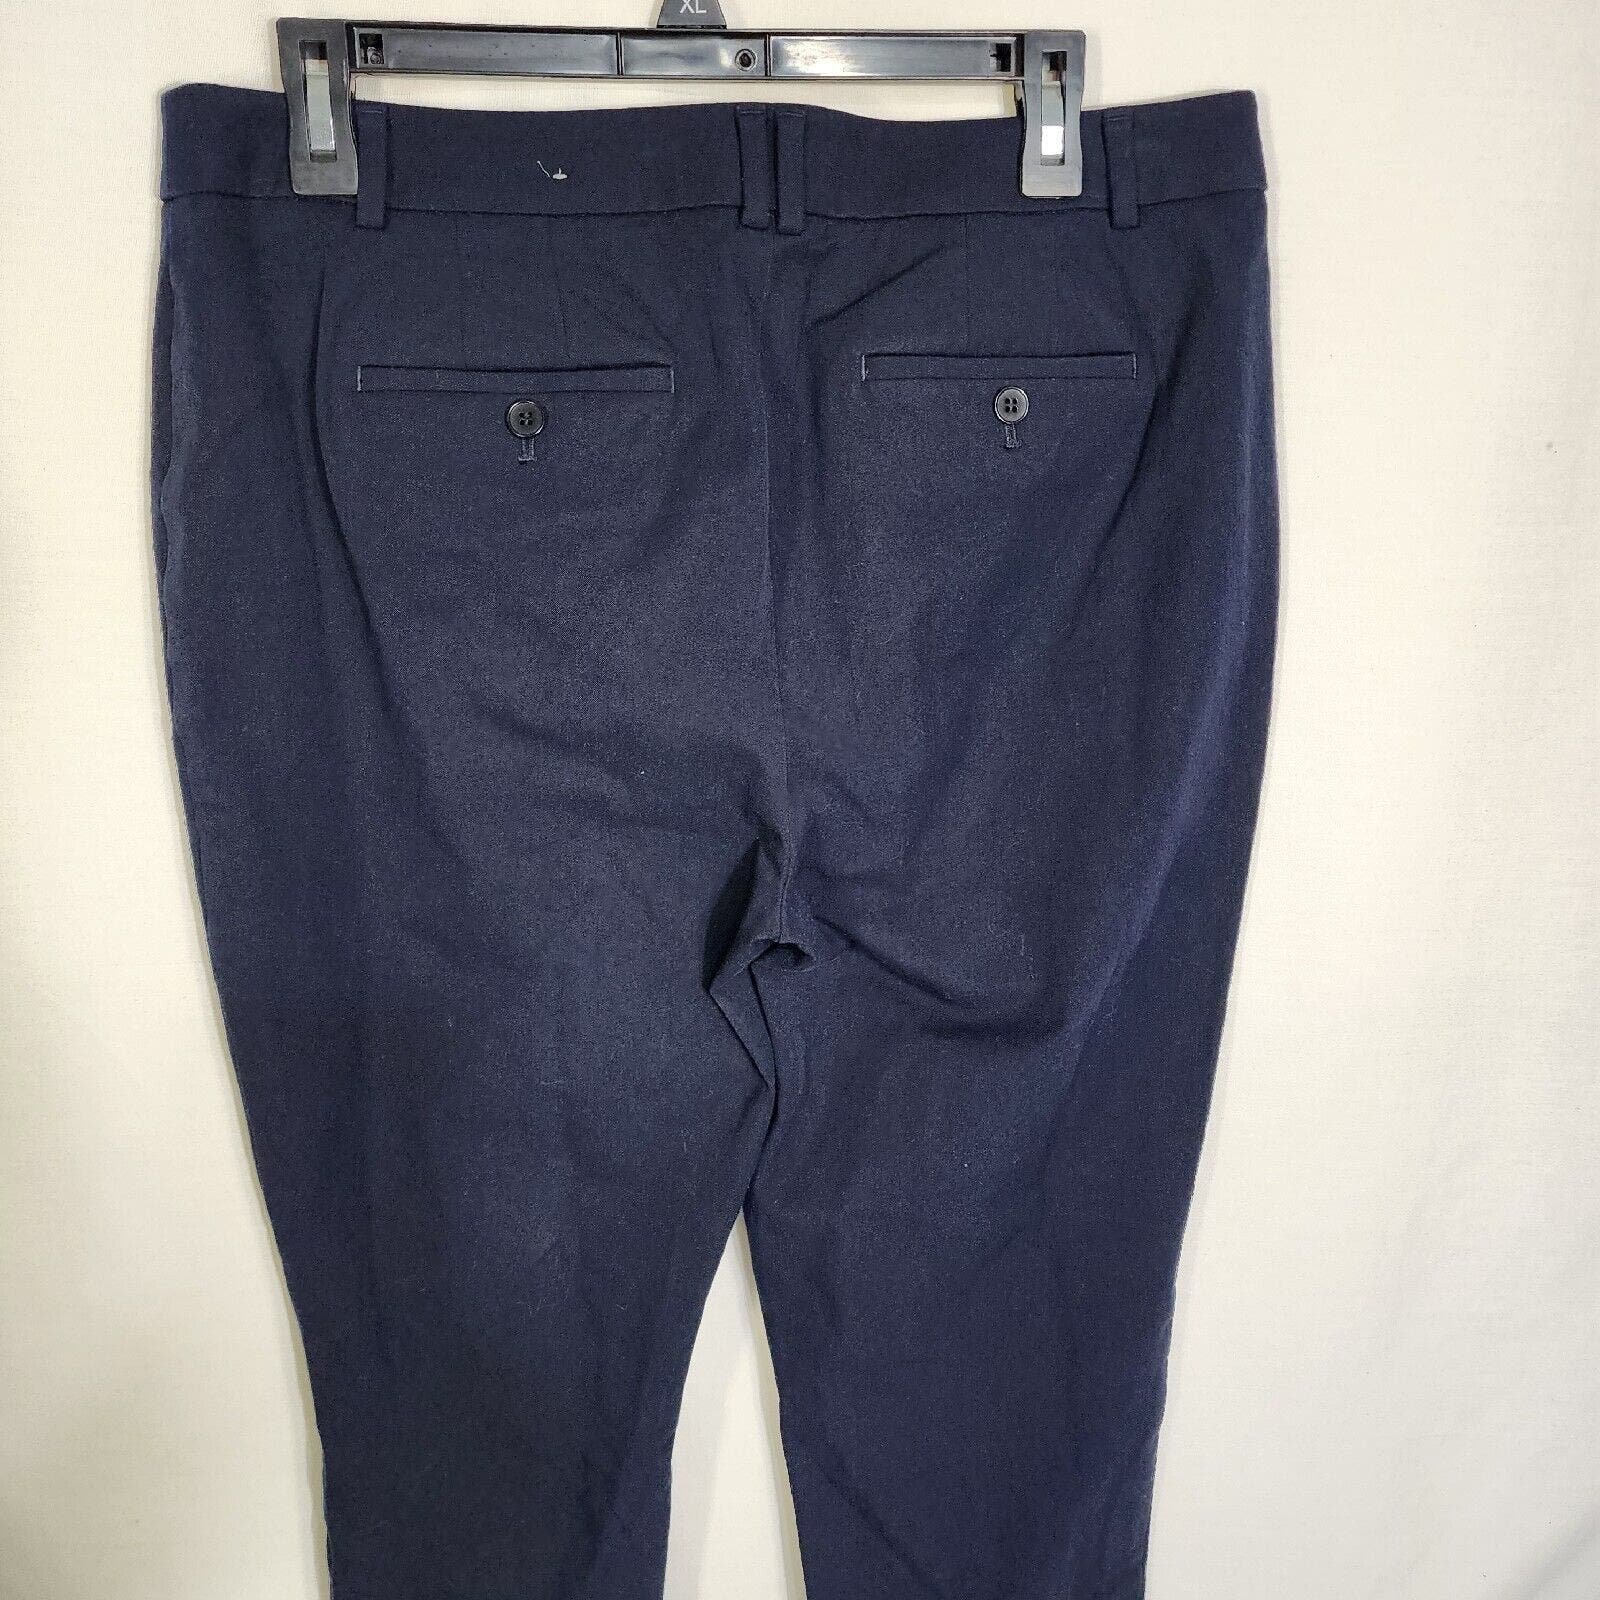 Classic Talbots Womens Pants Size 12 Petite Navy High Waist Straight Trouser Career Work m2pPbvzma just for you